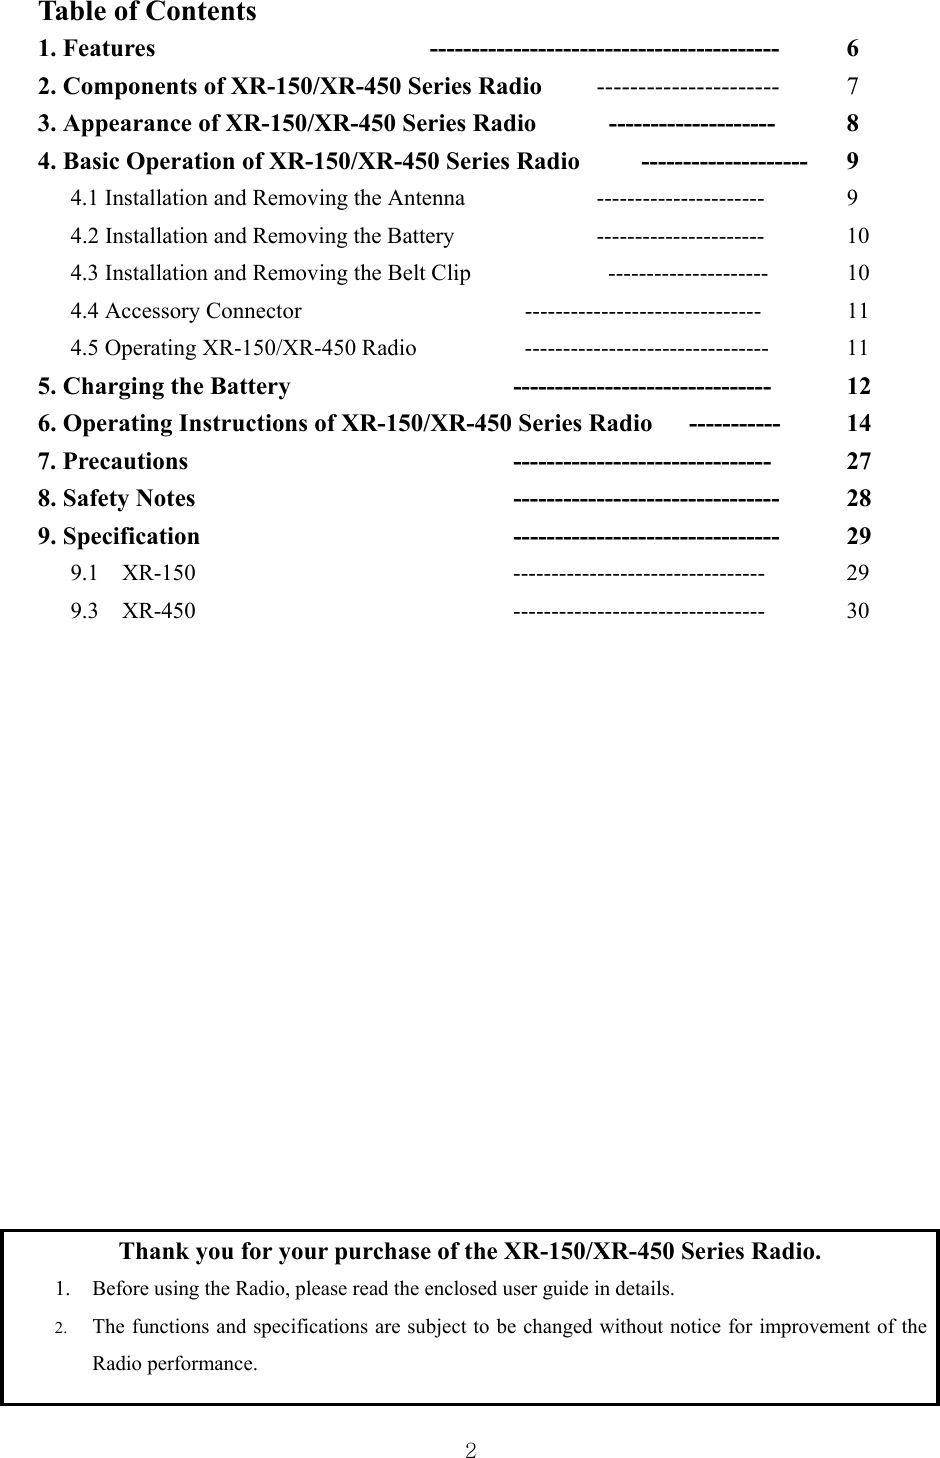  2Table of Contents 1. Features    ------------------------------------------ 6 2. Components of XR-150/XR-450 Series Radio    ---------------------- 7 3. Appearance of XR-150/XR-450 Series Radio     --------------------  8 4. Basic Operation of XR-150/XR-450 Series Radio     -------------------- 9 4.1 Installation and Removing the Antenna    ----------------------  9      4.2 Installation and Removing the Battery      ----------------------  10 4.3 Installation and Removing the Belt Clip      ---------------------  10 4.4 Accessory Connector        -------------------------------   11 4.5 Operating XR-150/XR-450 Radio      --------------------------------  11 5. Charging the Battery      ------------------------------- 12  6. Operating Instructions of XR-150/XR-450 Series Radio      -----------    14 7. Precautions     ------------------------------- 27 8. Safety Notes        -------------------------------- 28 9. Specification    -------------------------------- 29 9.1  XR-150    --------------------------------- 29 9.3  XR-450    --------------------------------- 30                 Thank you for your purchase of the XR-150/XR-450 Series Radio. 1. Before using the Radio, please read the enclosed user guide in details. 2. The functions and specifications are subject to be changed without notice for improvement of the Radio performance. 